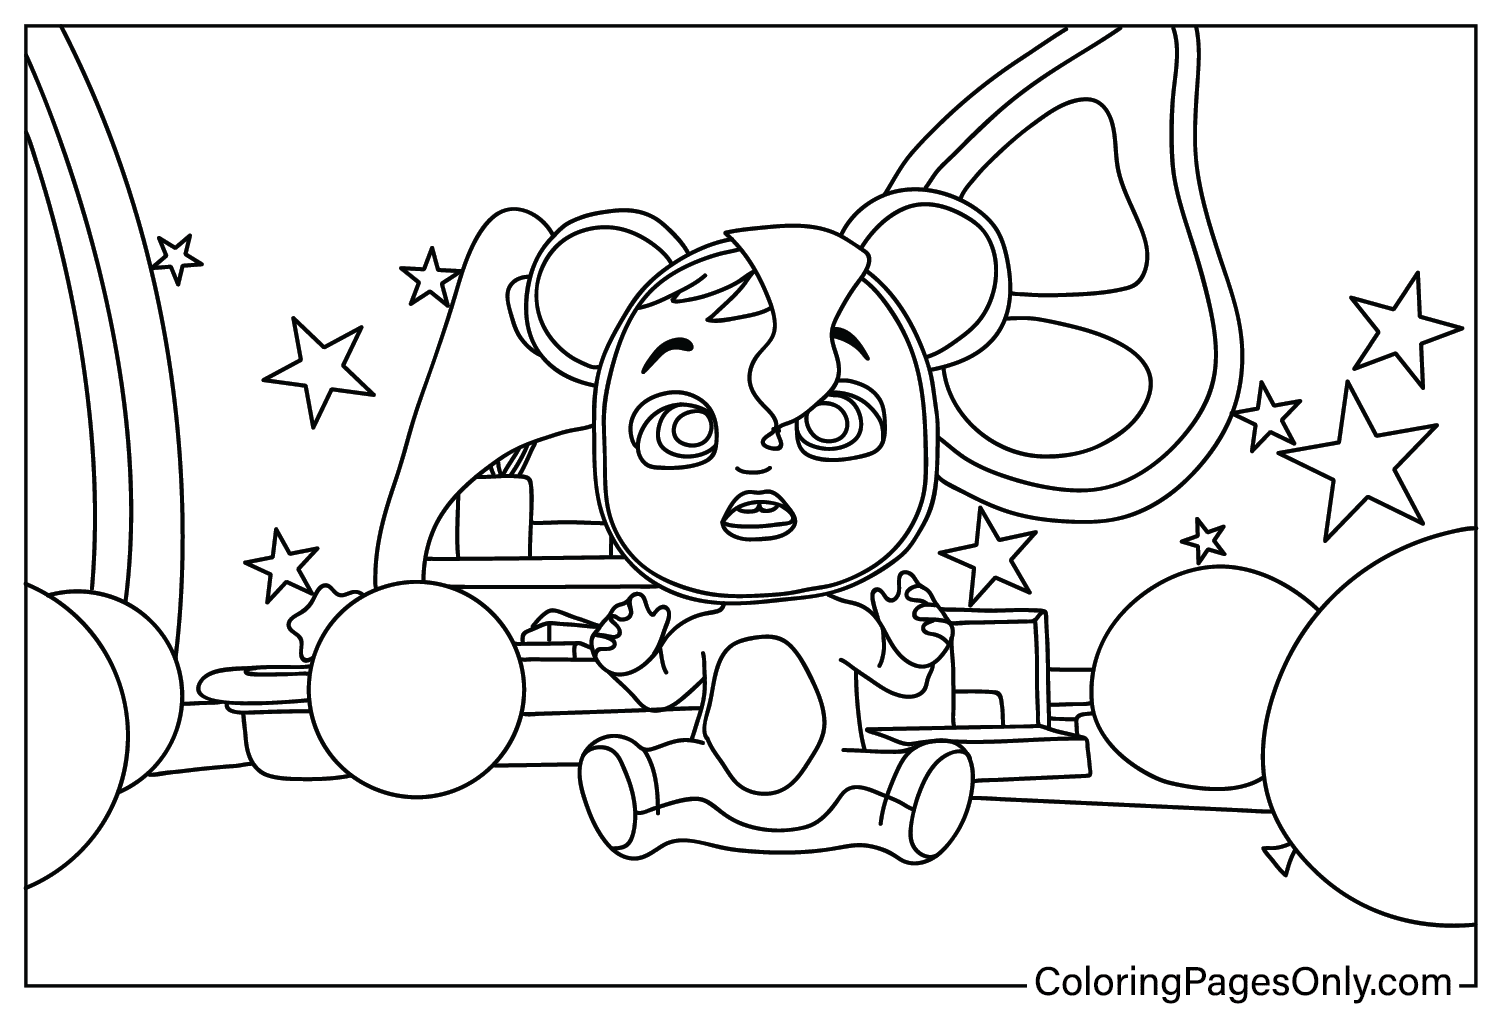 Printable Cry Babies Coloring Page from Cry Babies